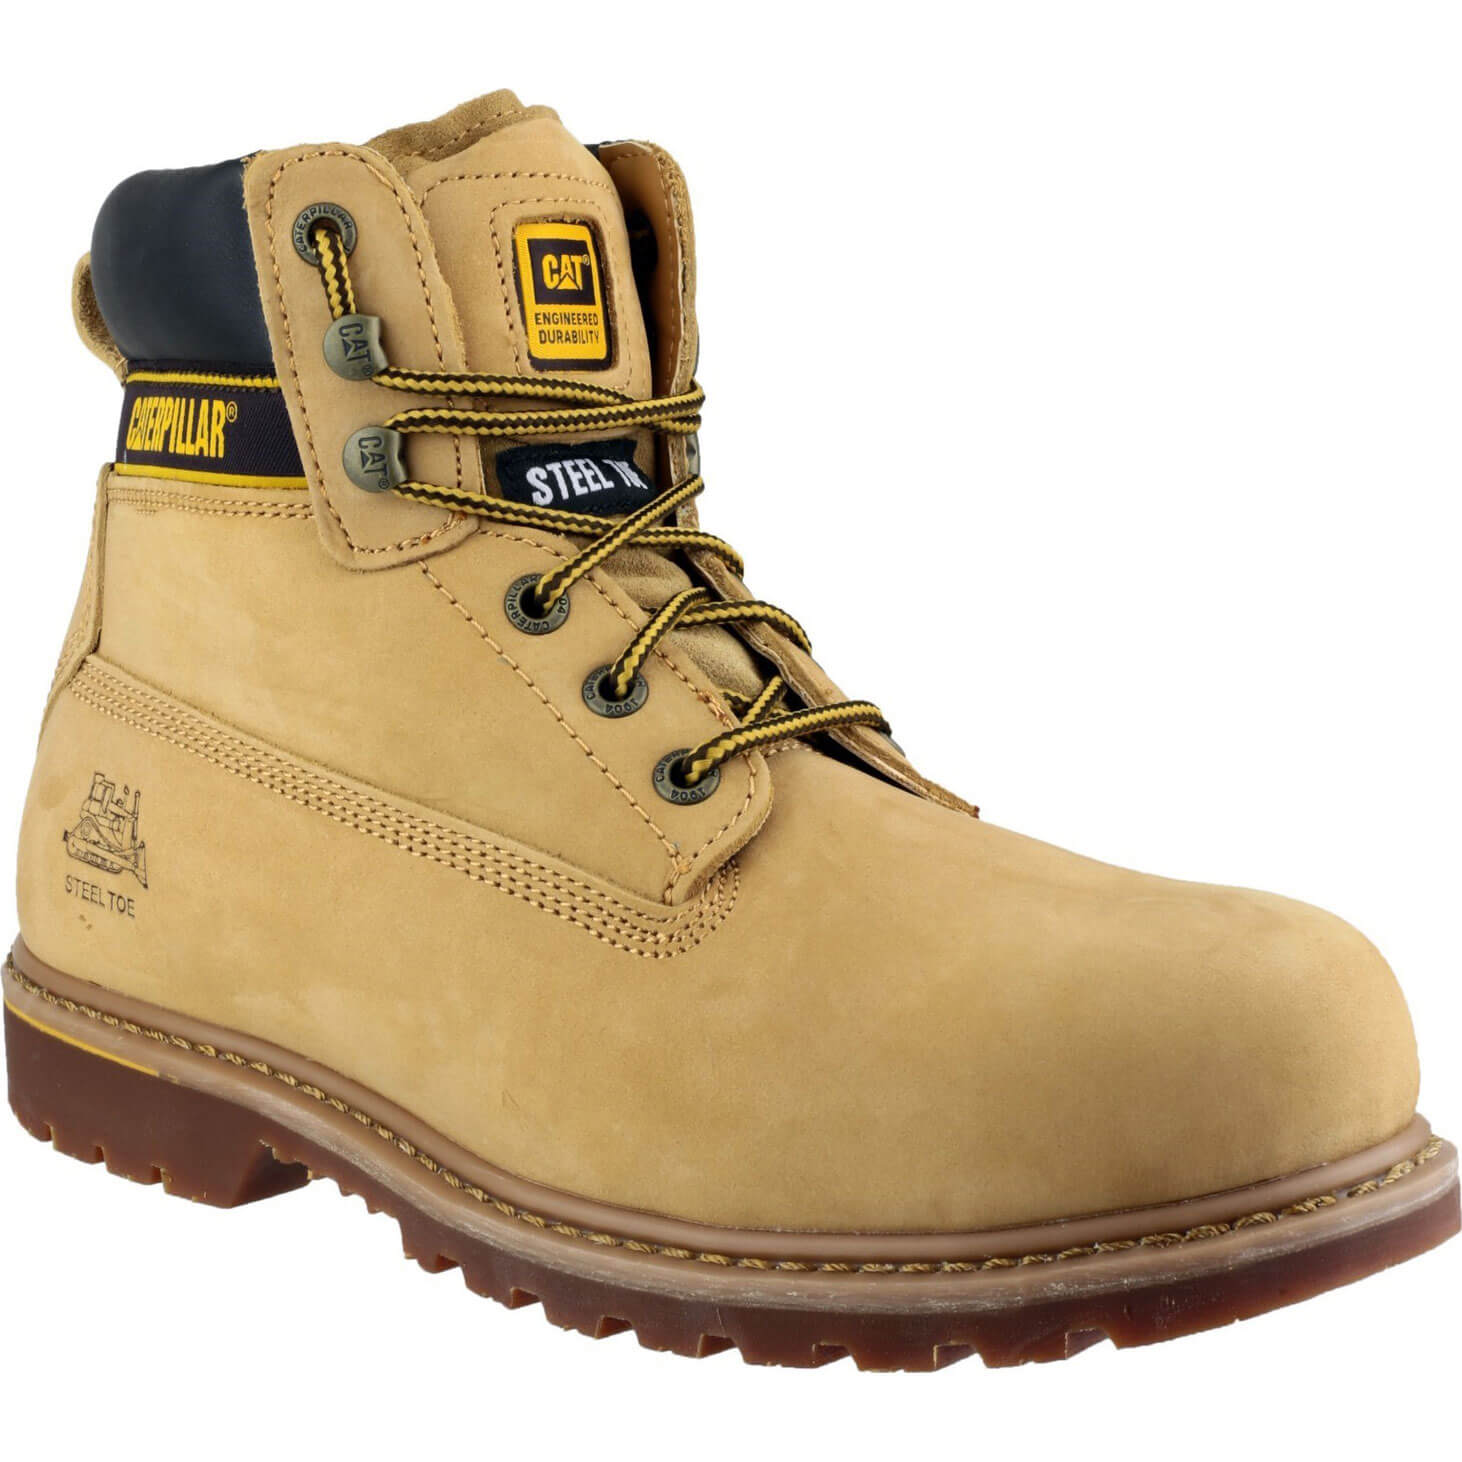 Caterpillar Mens Holton Safety Boots Honey Size 15